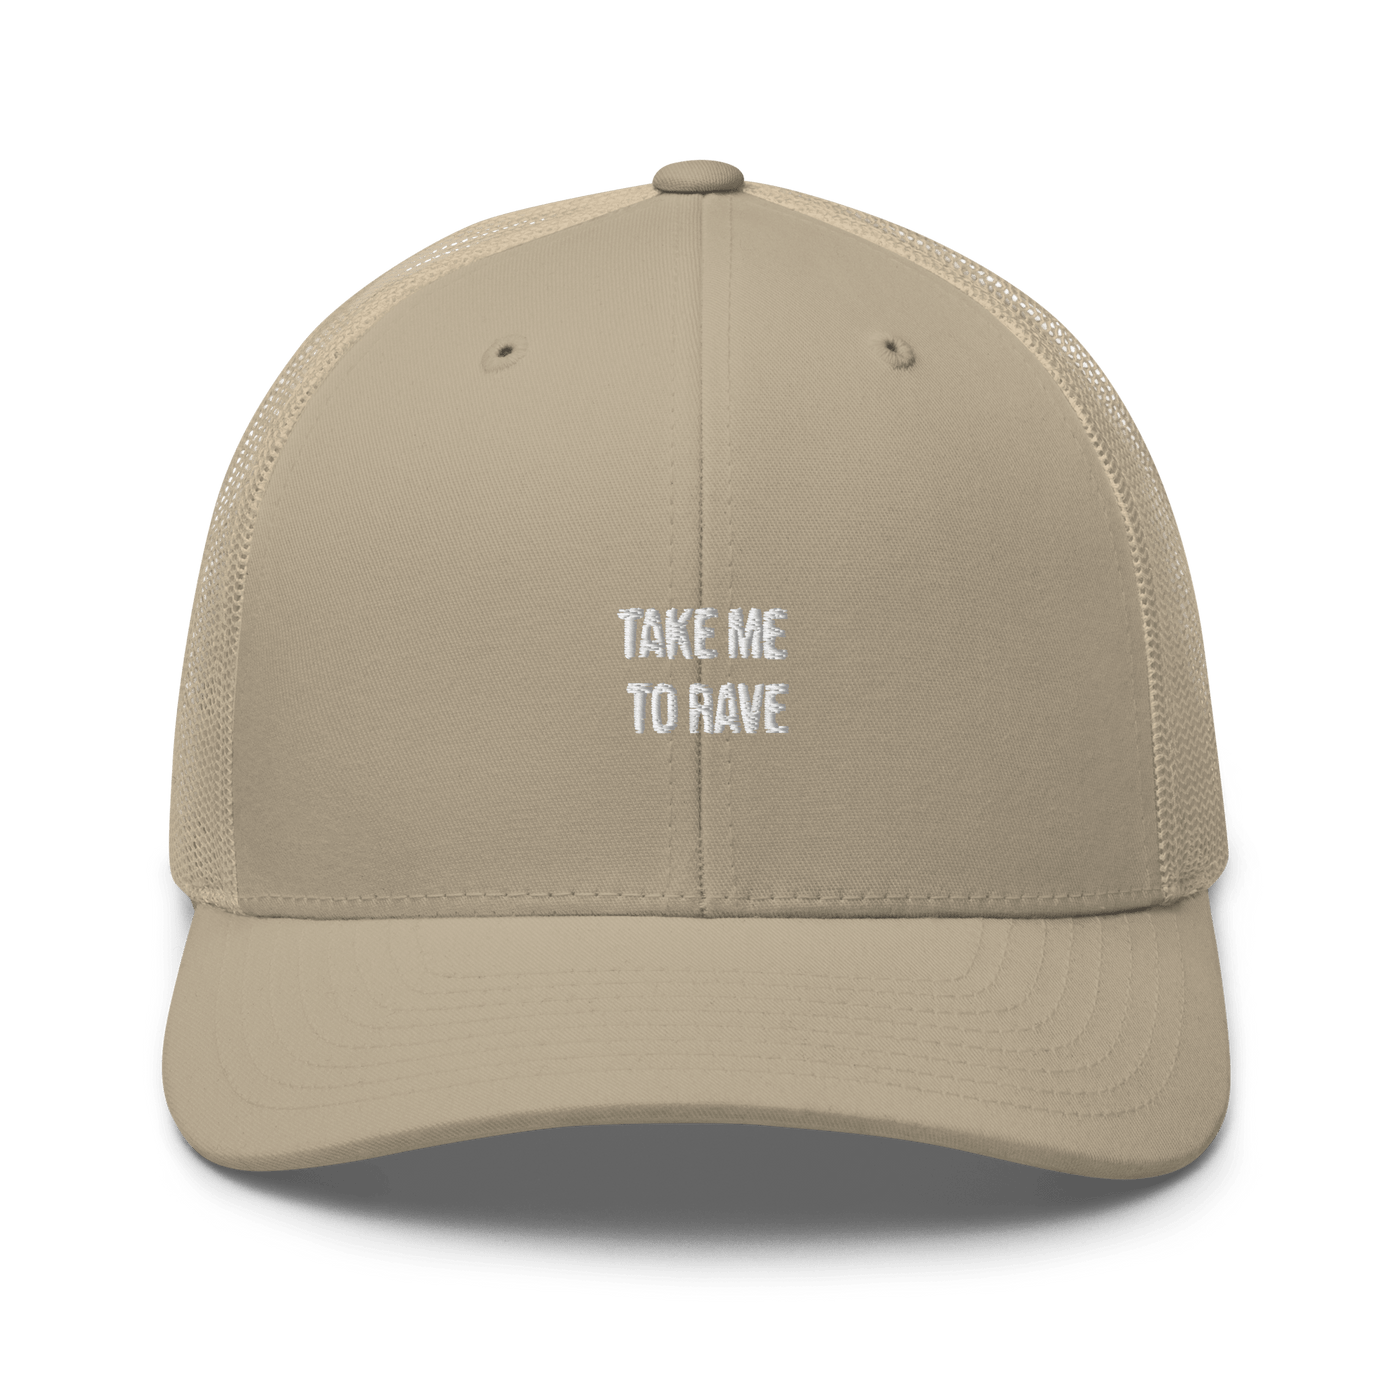 Take me to rave Trucker Cap - Red - - Just Another Cap Store